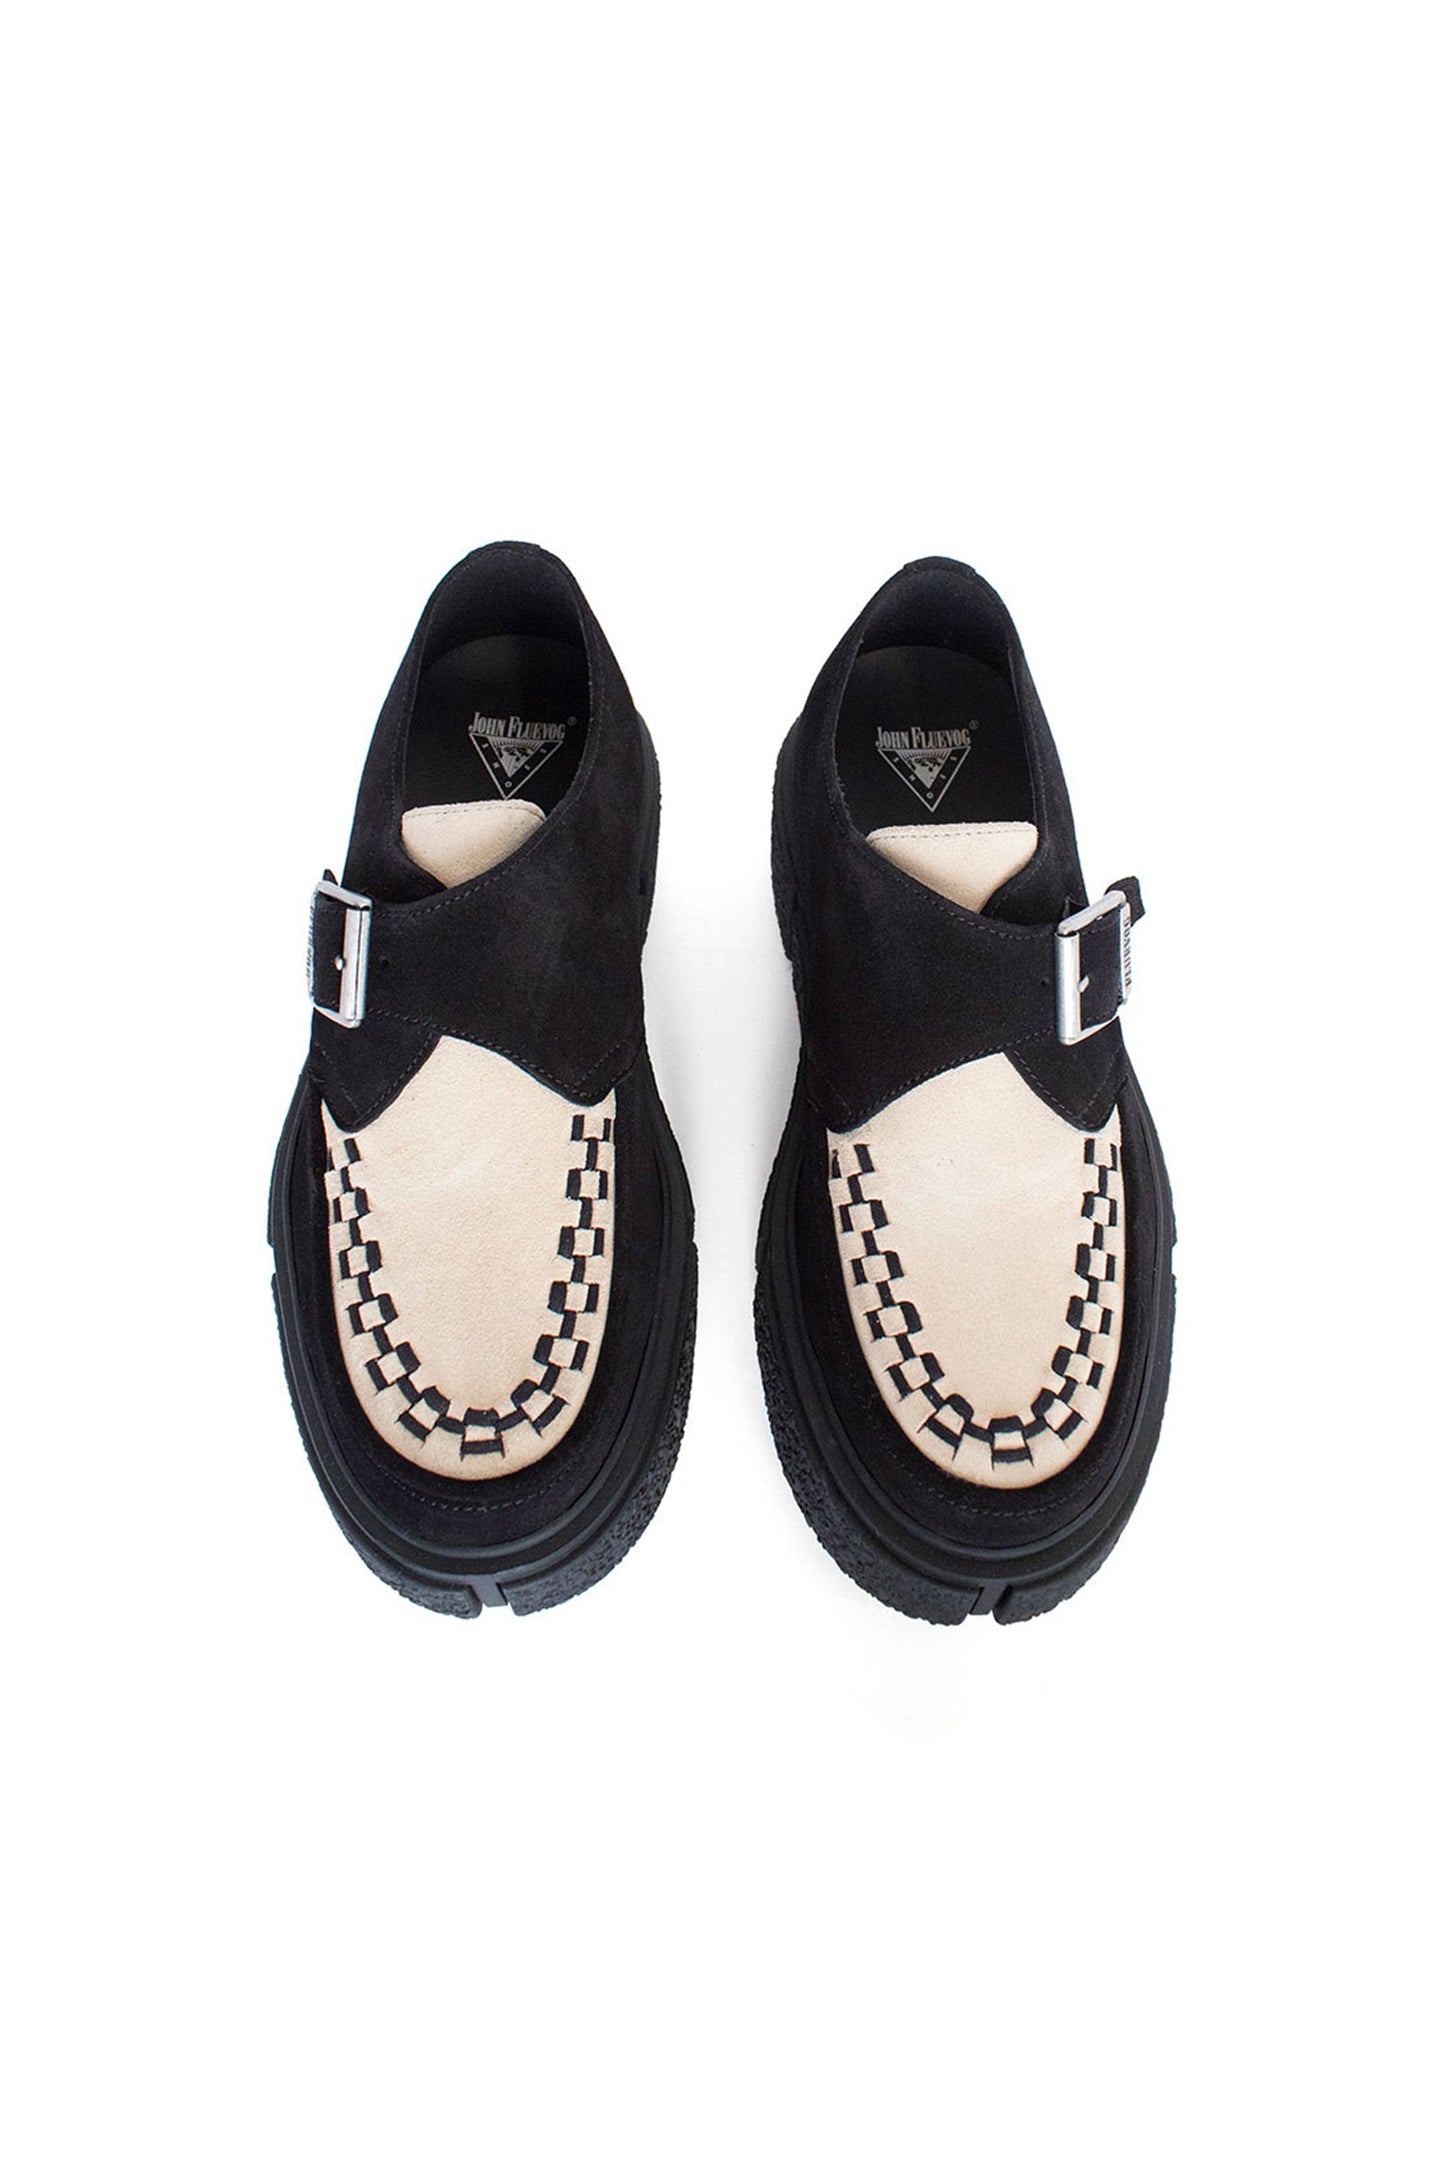 From the top, Creepers, the shoe are black, front beige with large hems, a buckle with label